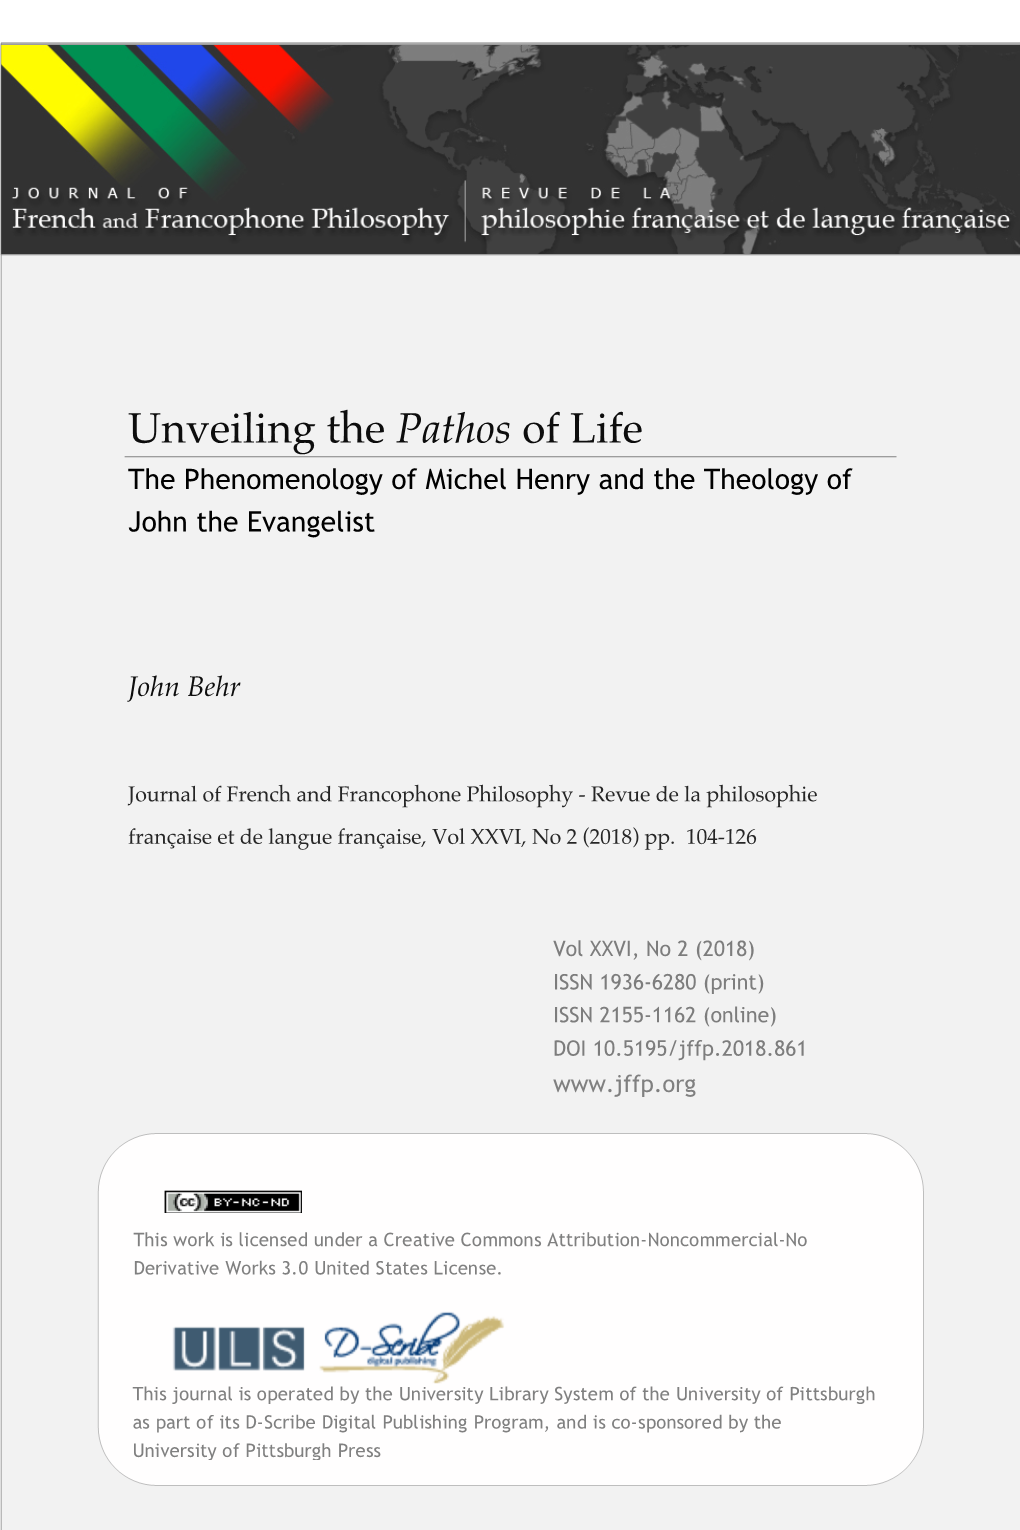 Unveiling the Pathos of Life the Phenomenology of Michel Henry and the Theology of John the Evangelist